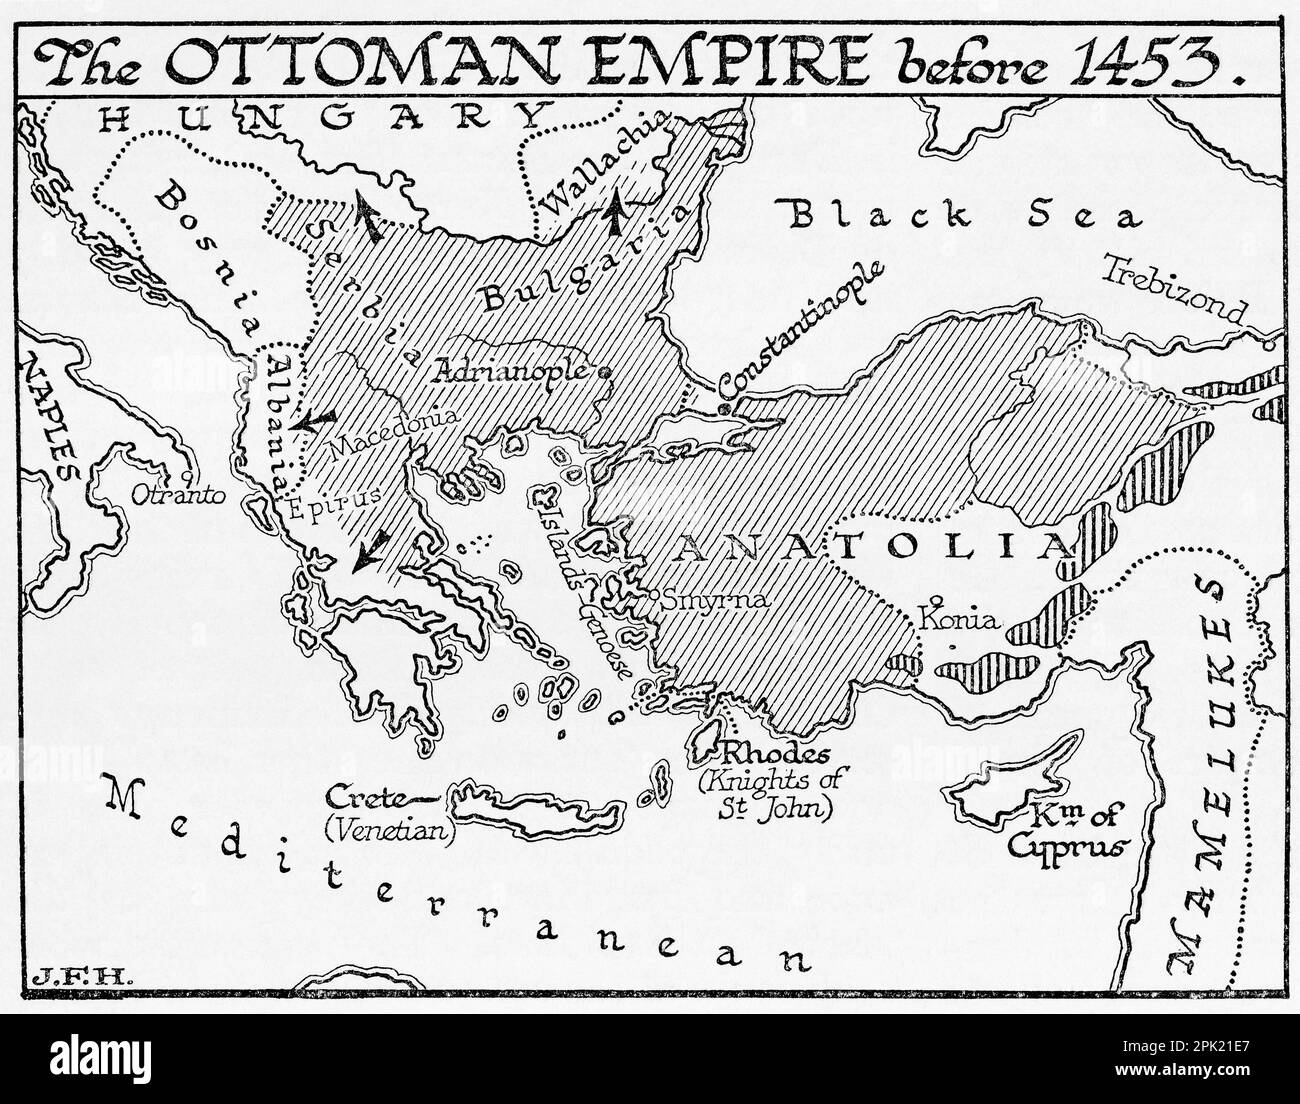 Map of the Ottoman Empire before 1453.  From the book Outline of History by H.G. Wells, published 1920. Stock Photo